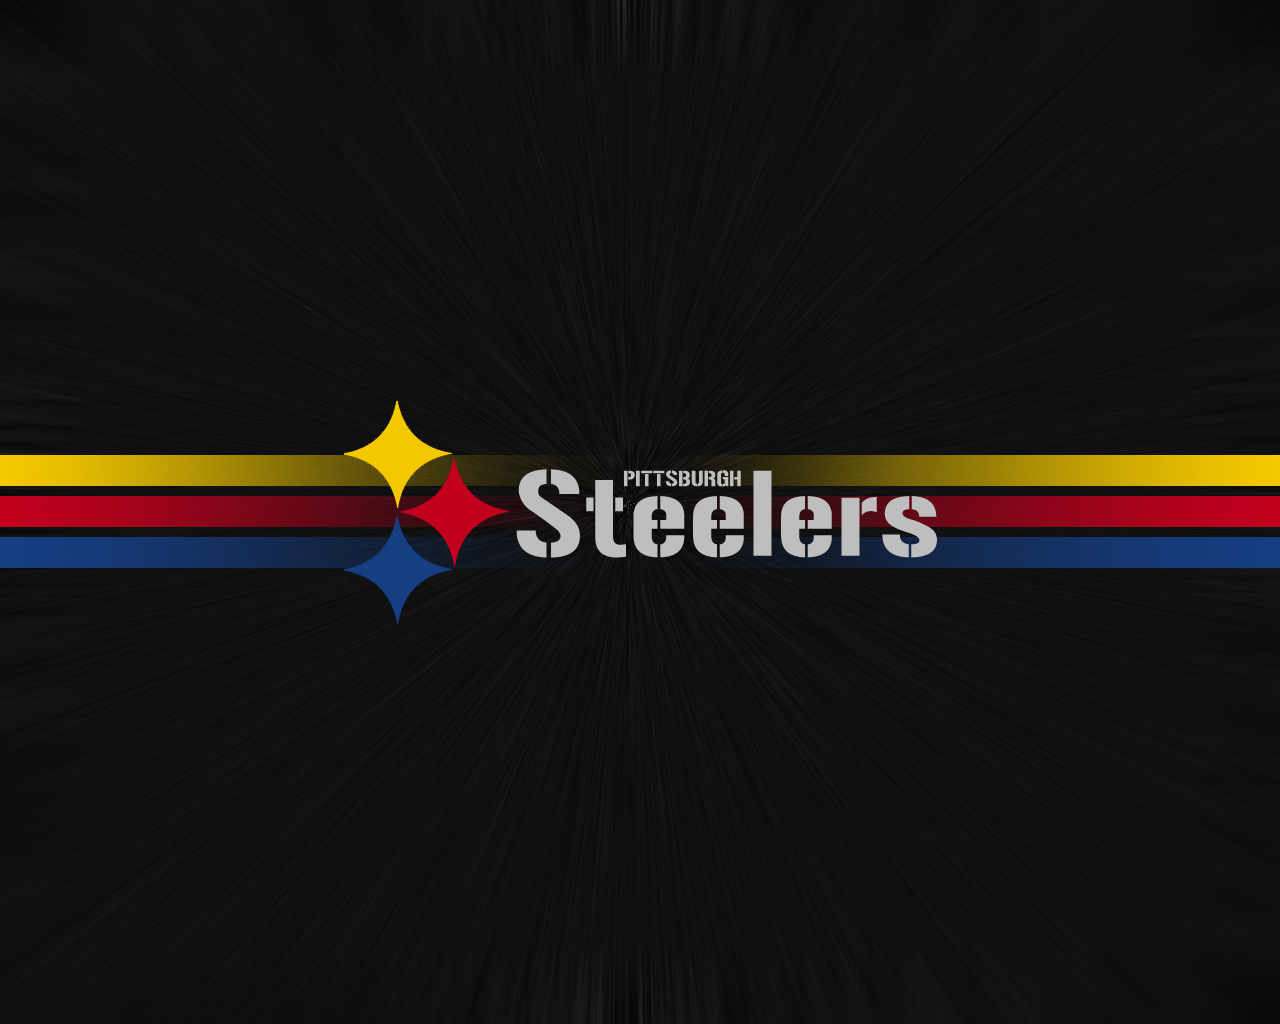 Hope You Like This Pittsburgh Steelers Wallpaper Background In High